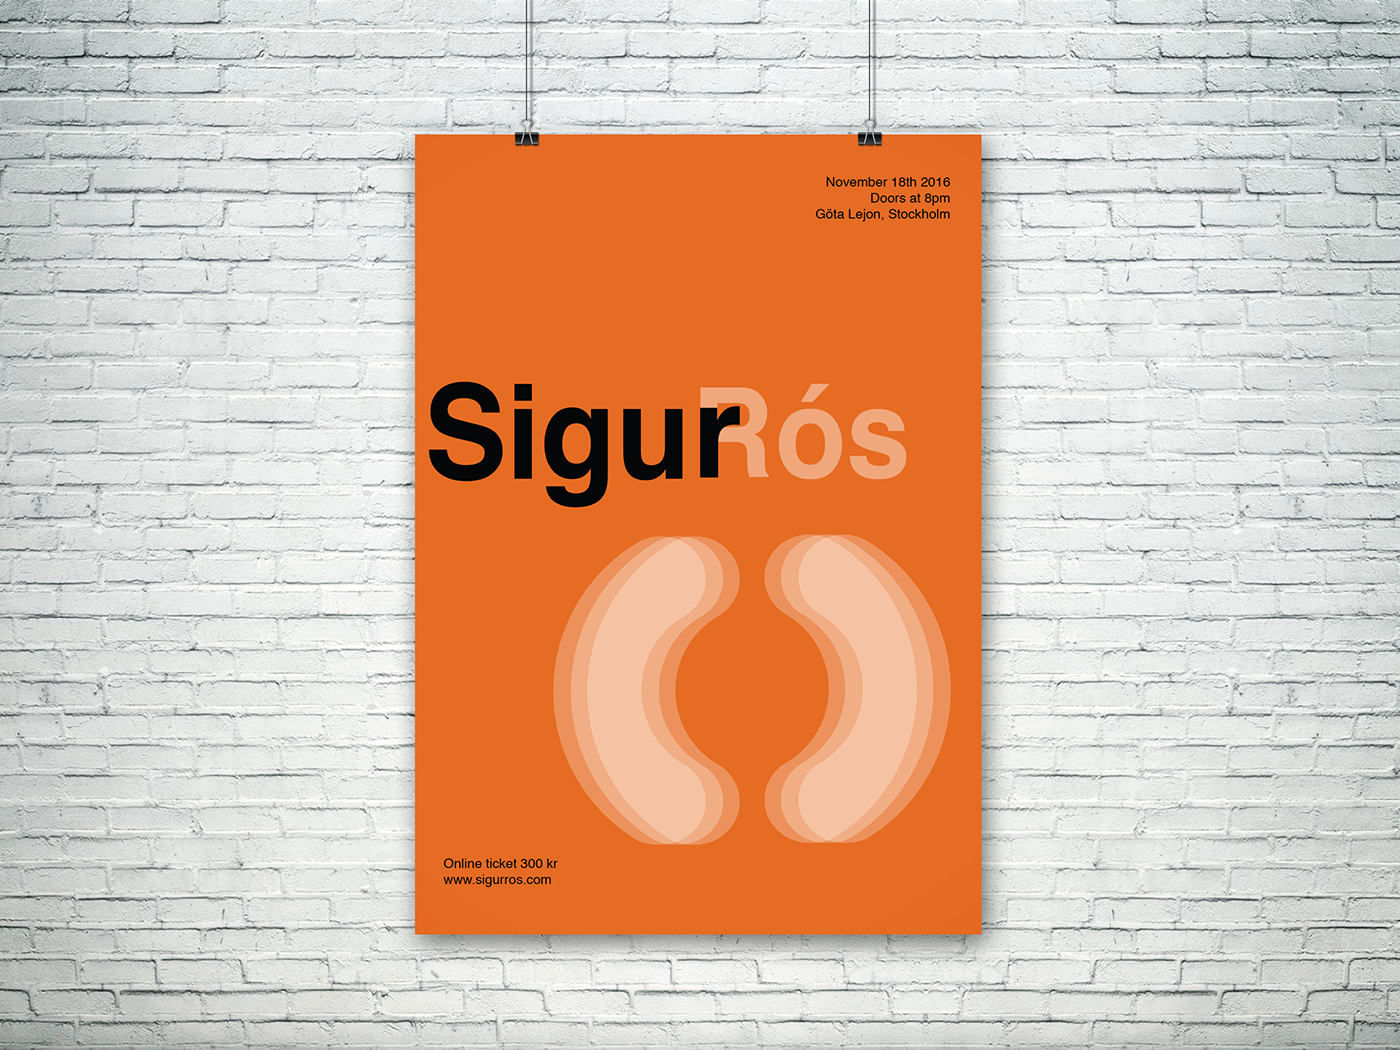 swiss style International typographic style typographic style sigur ros poster poster concert SigurRós music band band poster helvetica